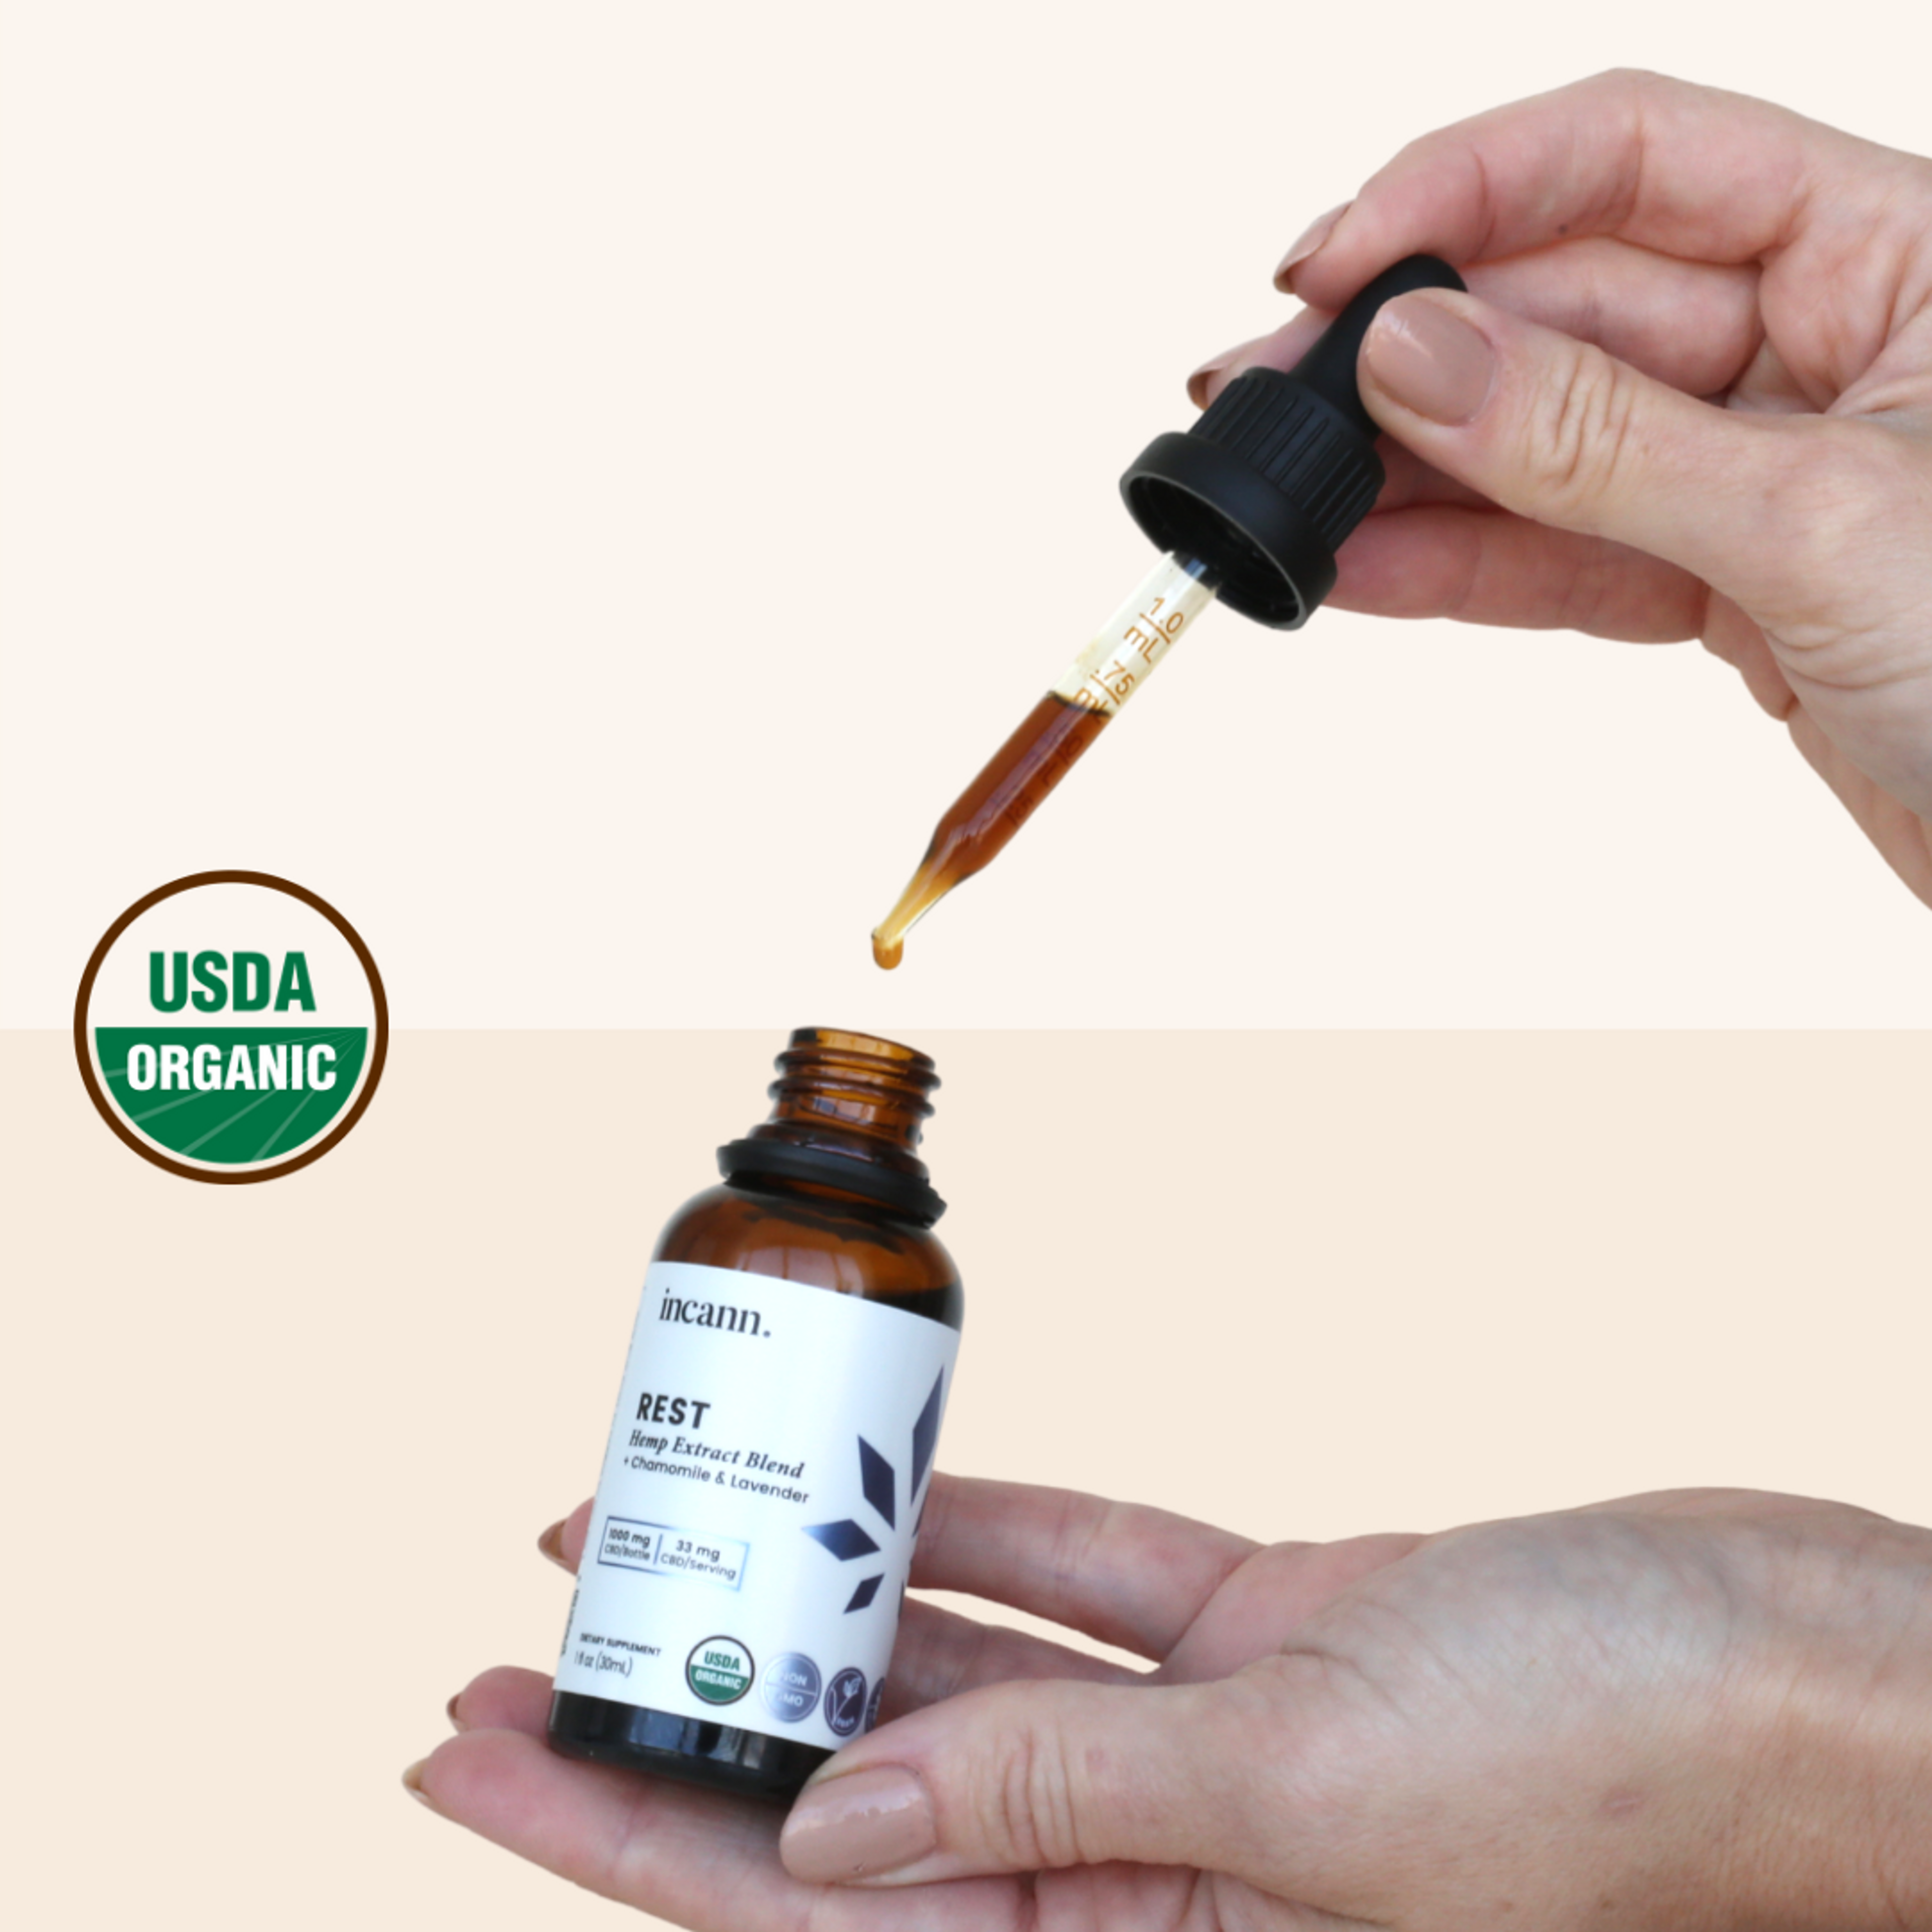 Rest Tincture 1000mg CBD - Whole Plant Extract